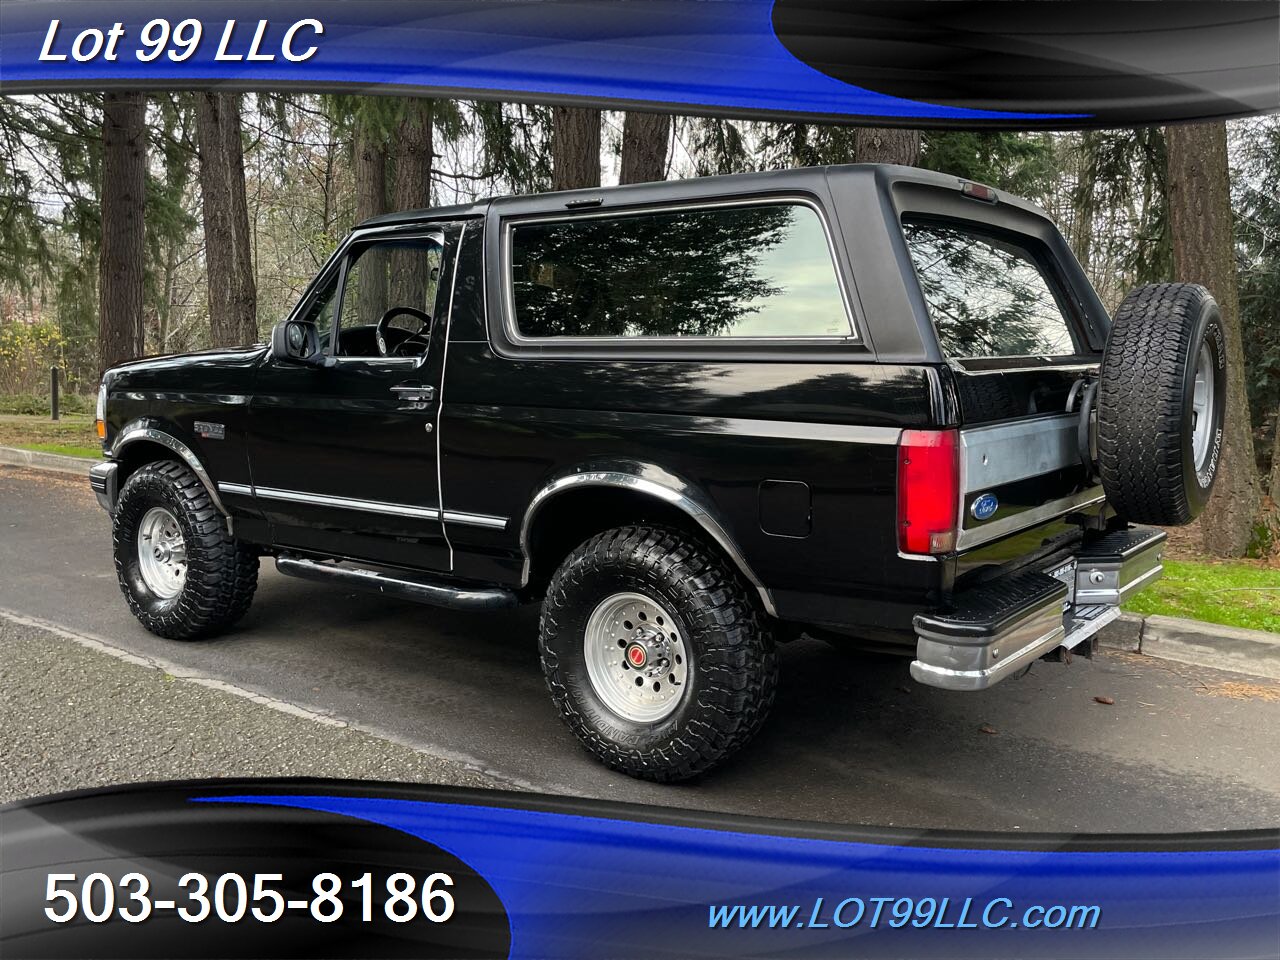 1993 Ford Bronco XLT 4x4 5.8L V8 New 33 " Tires and Carpet KIT   - Photo 8 - Milwaukie, OR 97267